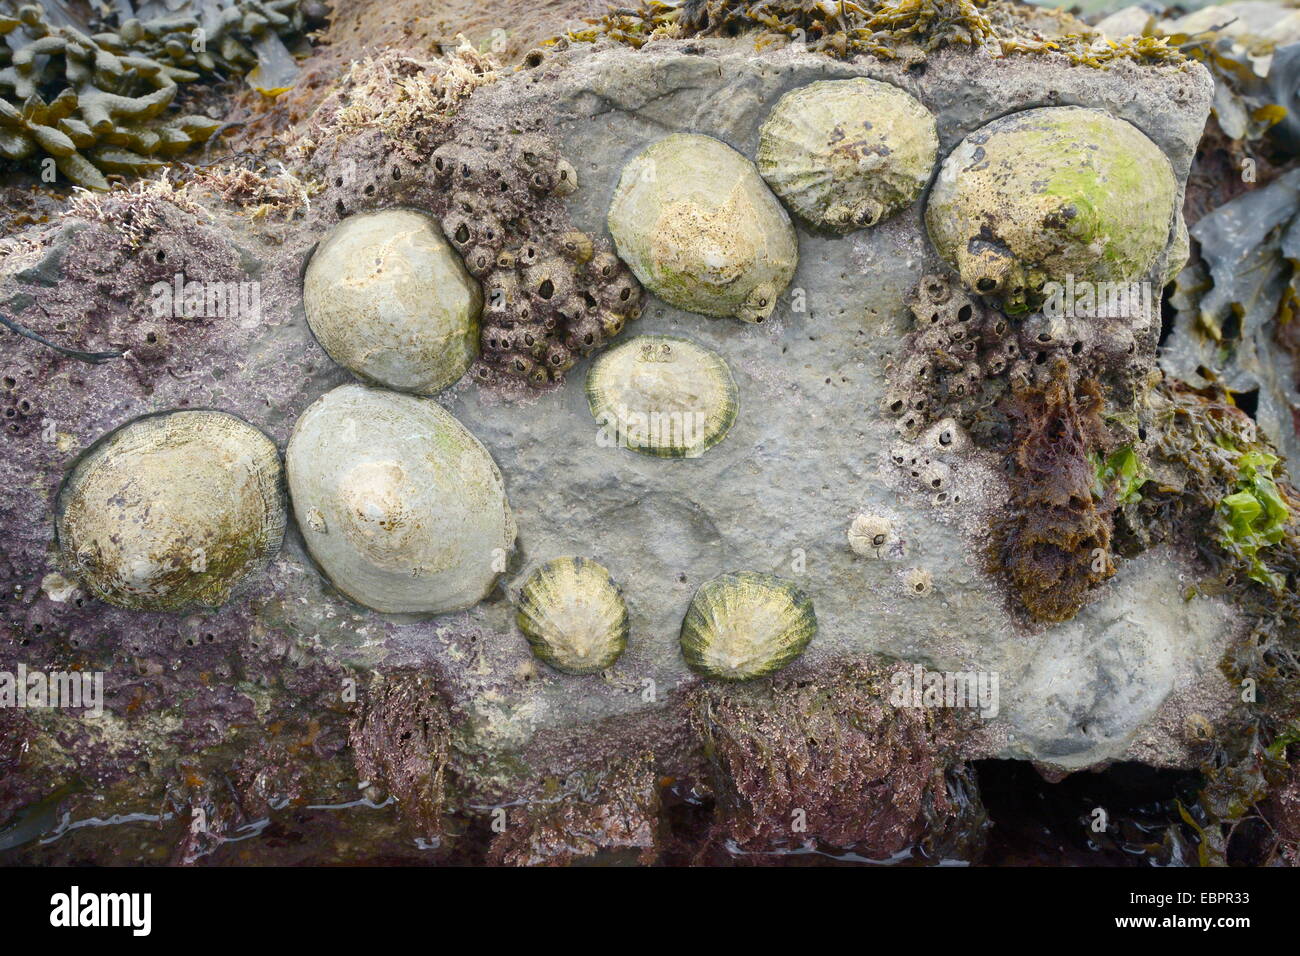 Common limpets (Patella vulgata) and acorn barnacles attached to rocks exposed at low tide, Dorset, England, UK Stock Photo